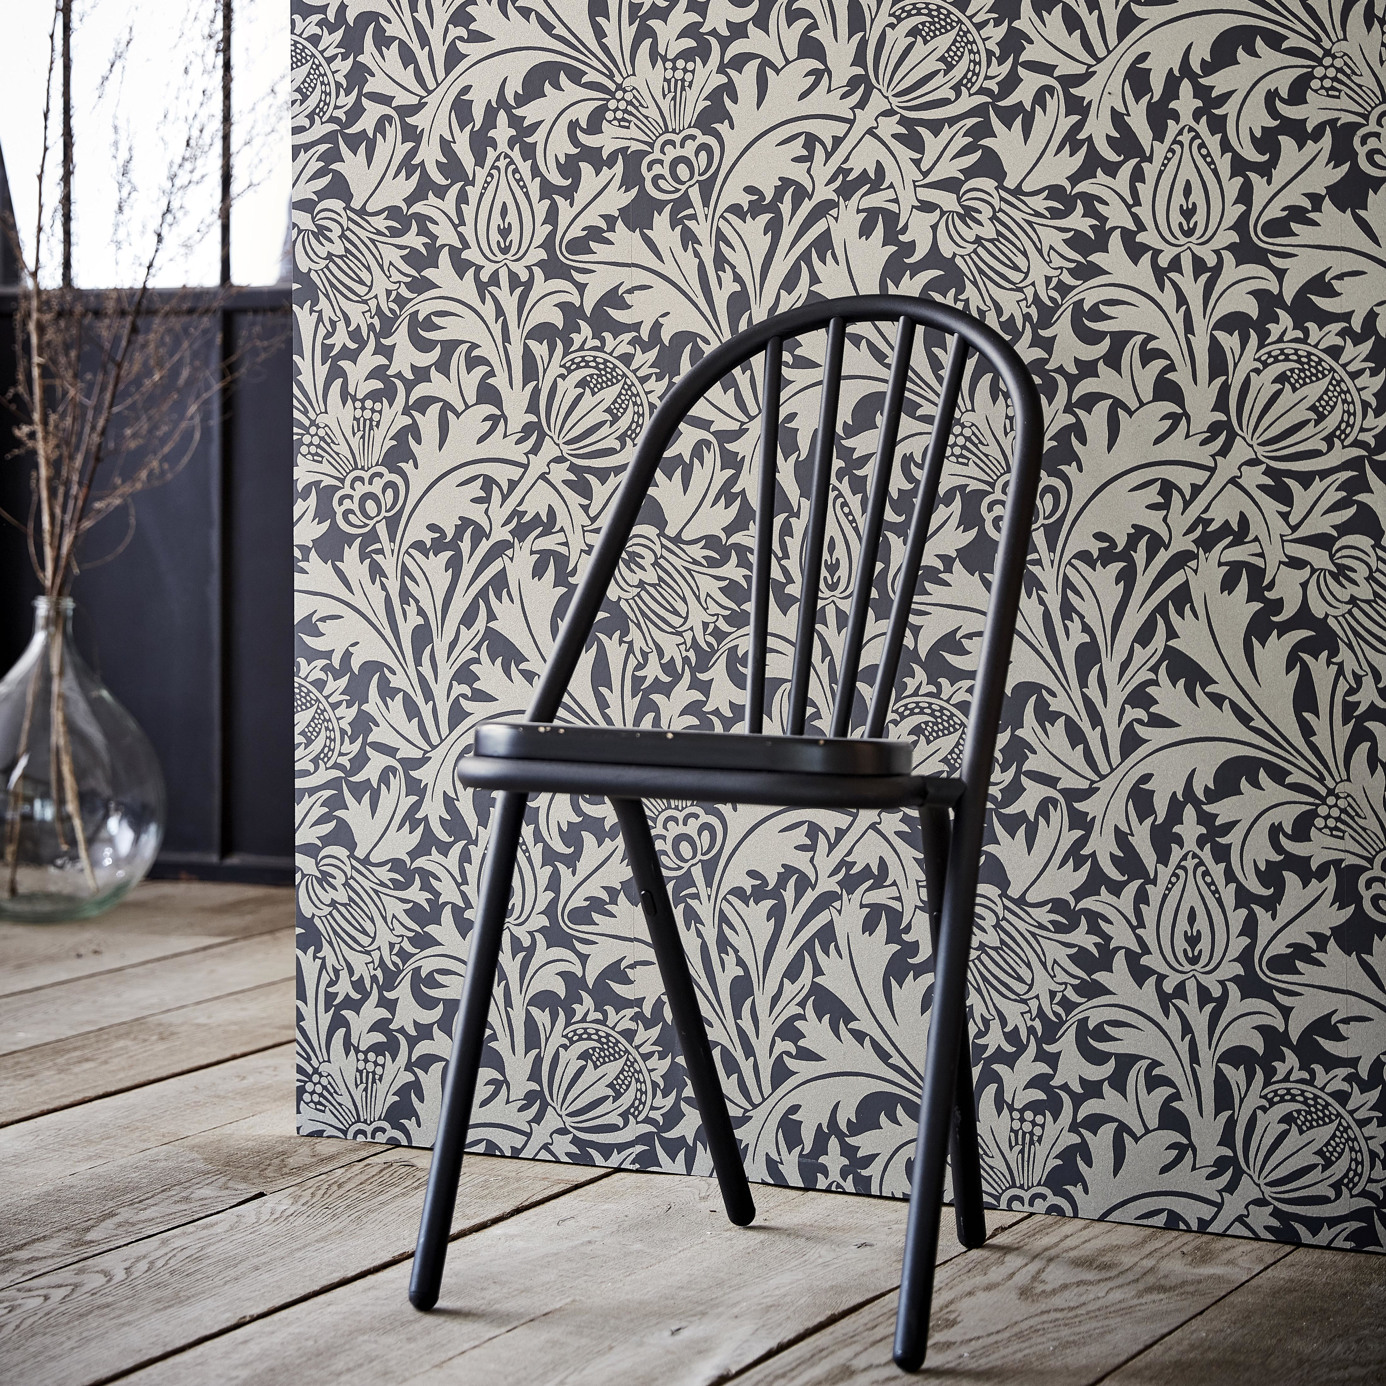 Pure Thistle ( Beaded) Gilver Wallpaper by MOR